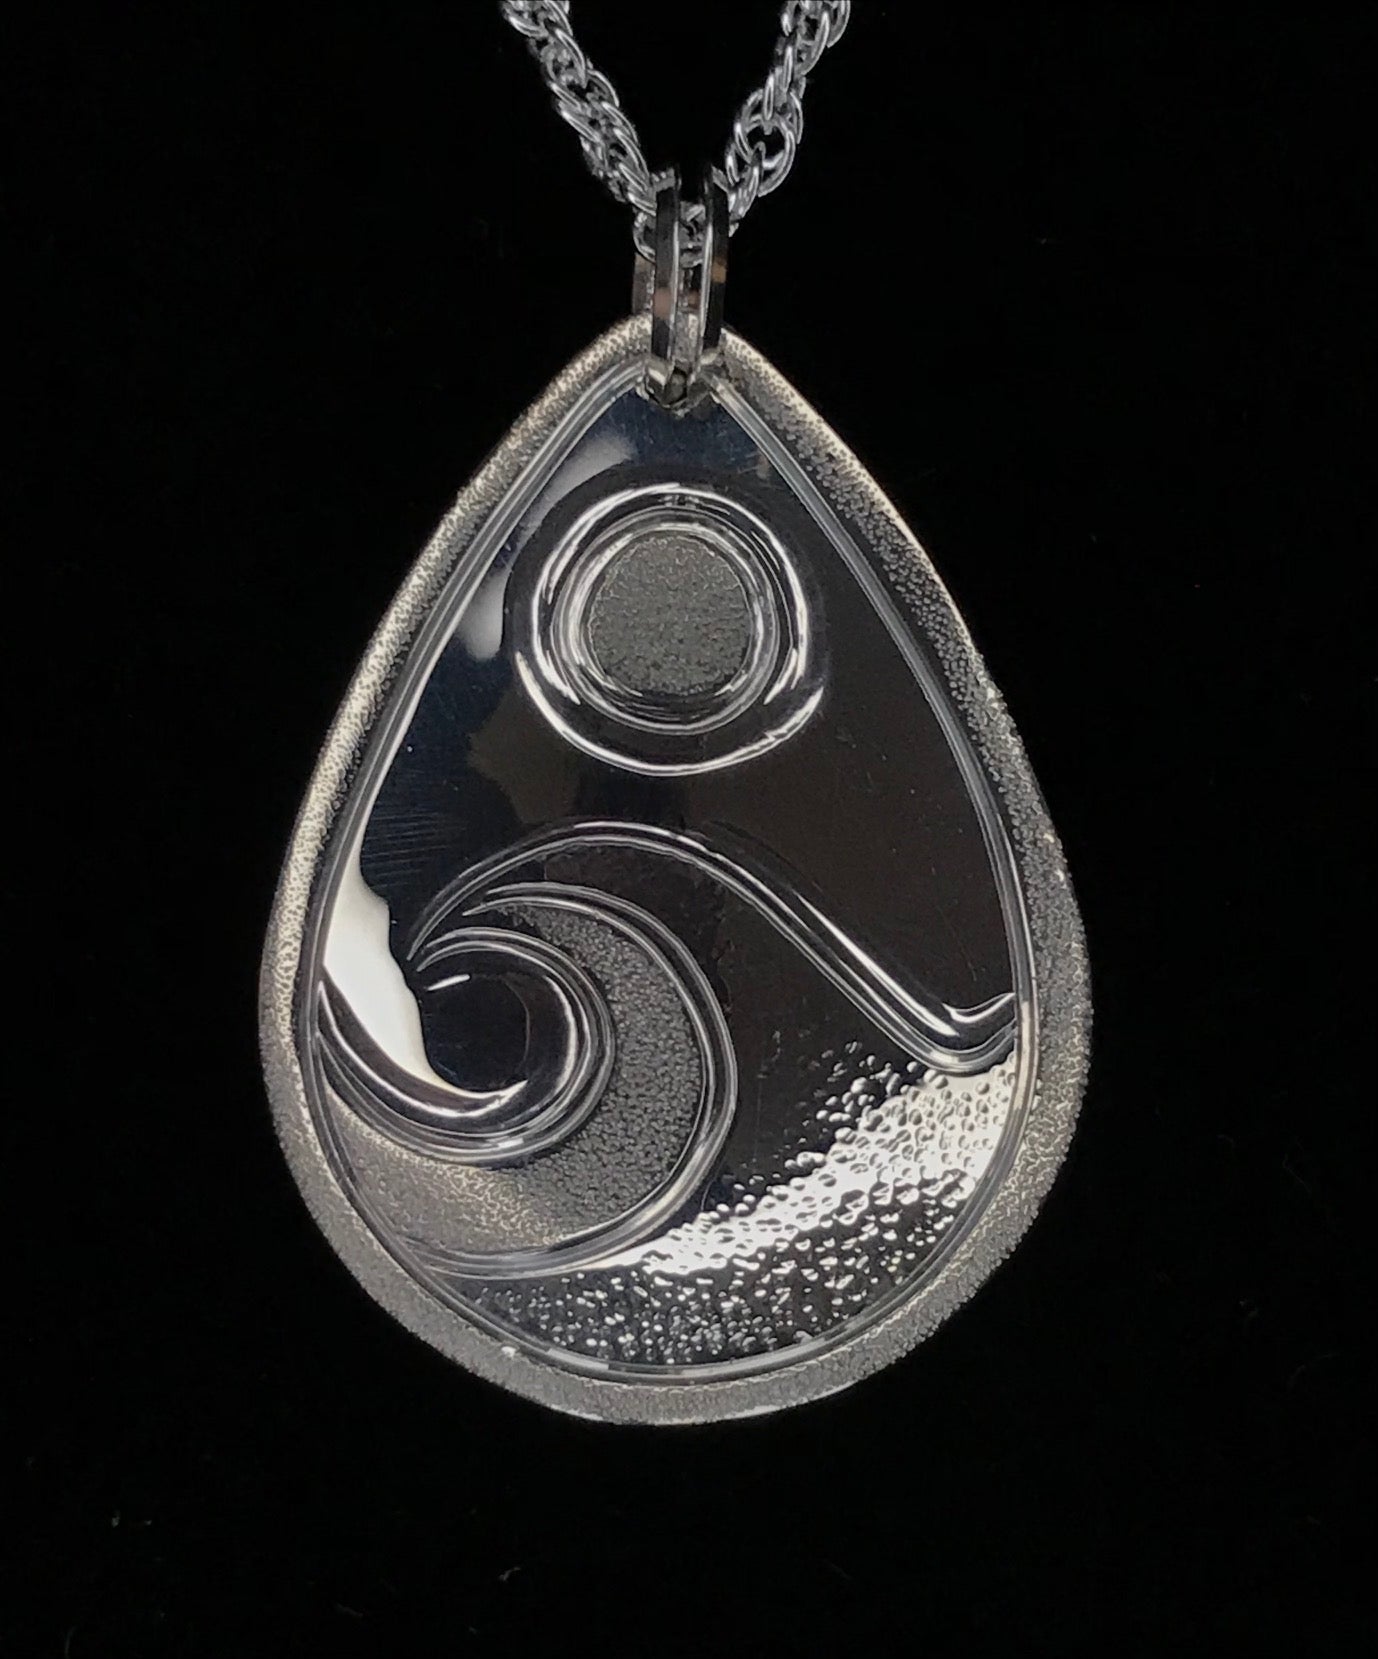 Follow The Tides sterling silver pendant by island artisan jeweller Laura Dutheil.